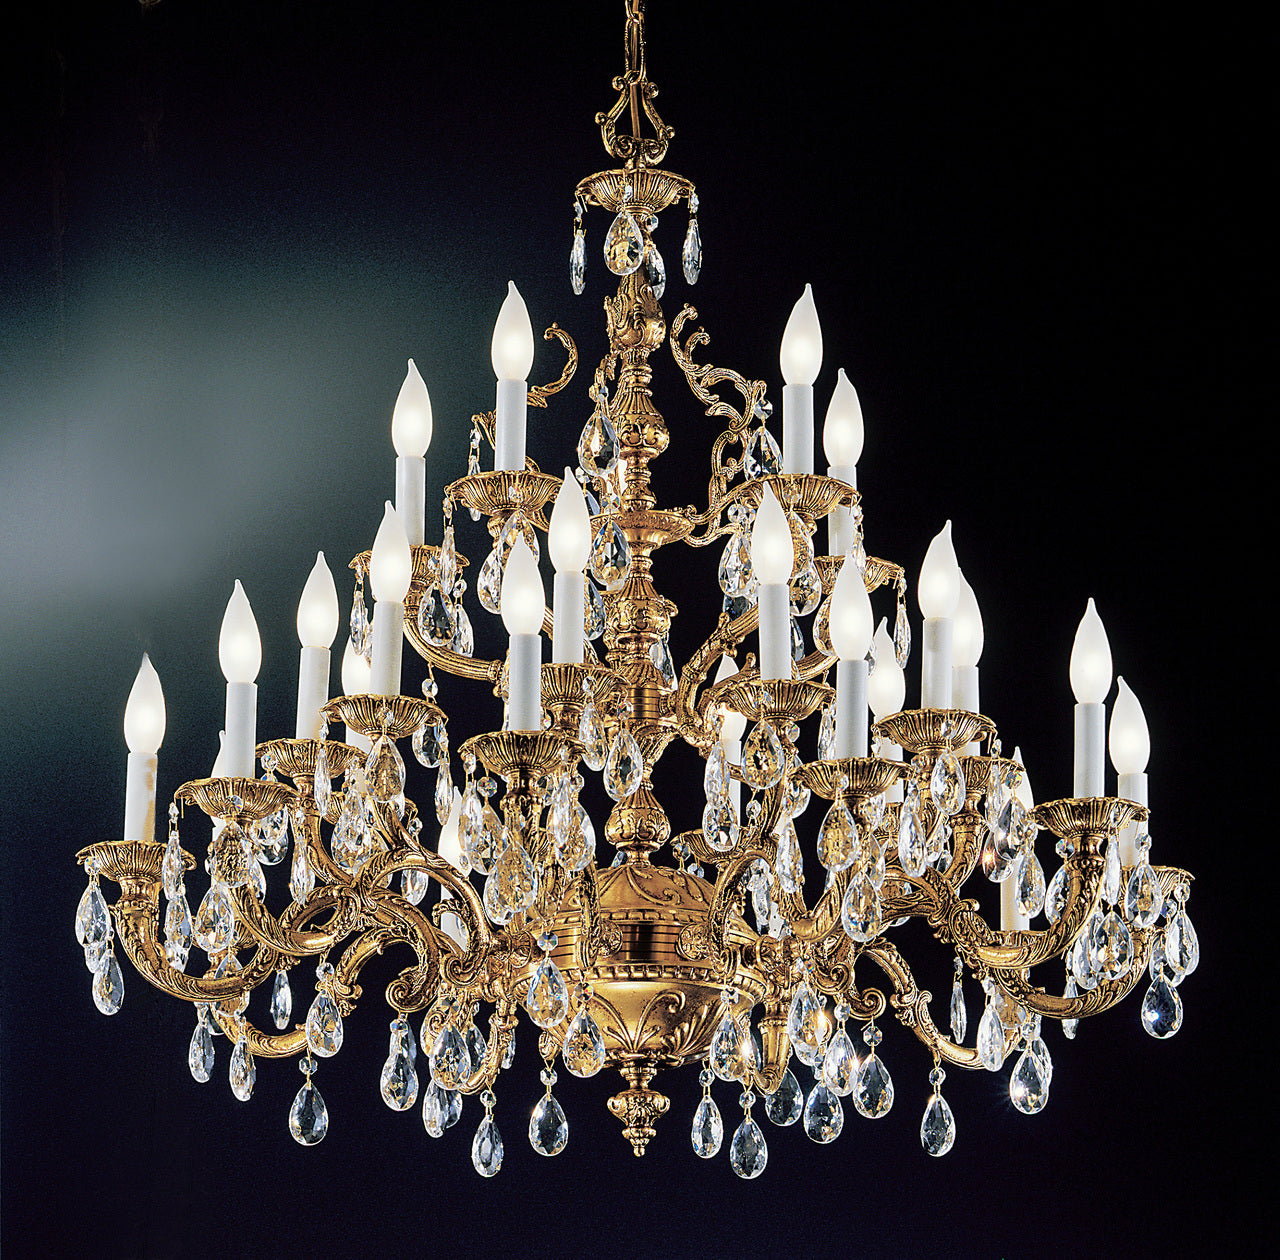 Classic Lighting 5525 OWB S Barcelona Crystal/Cast Brass Chandelier in Olde World Bronze (Imported from Spain)